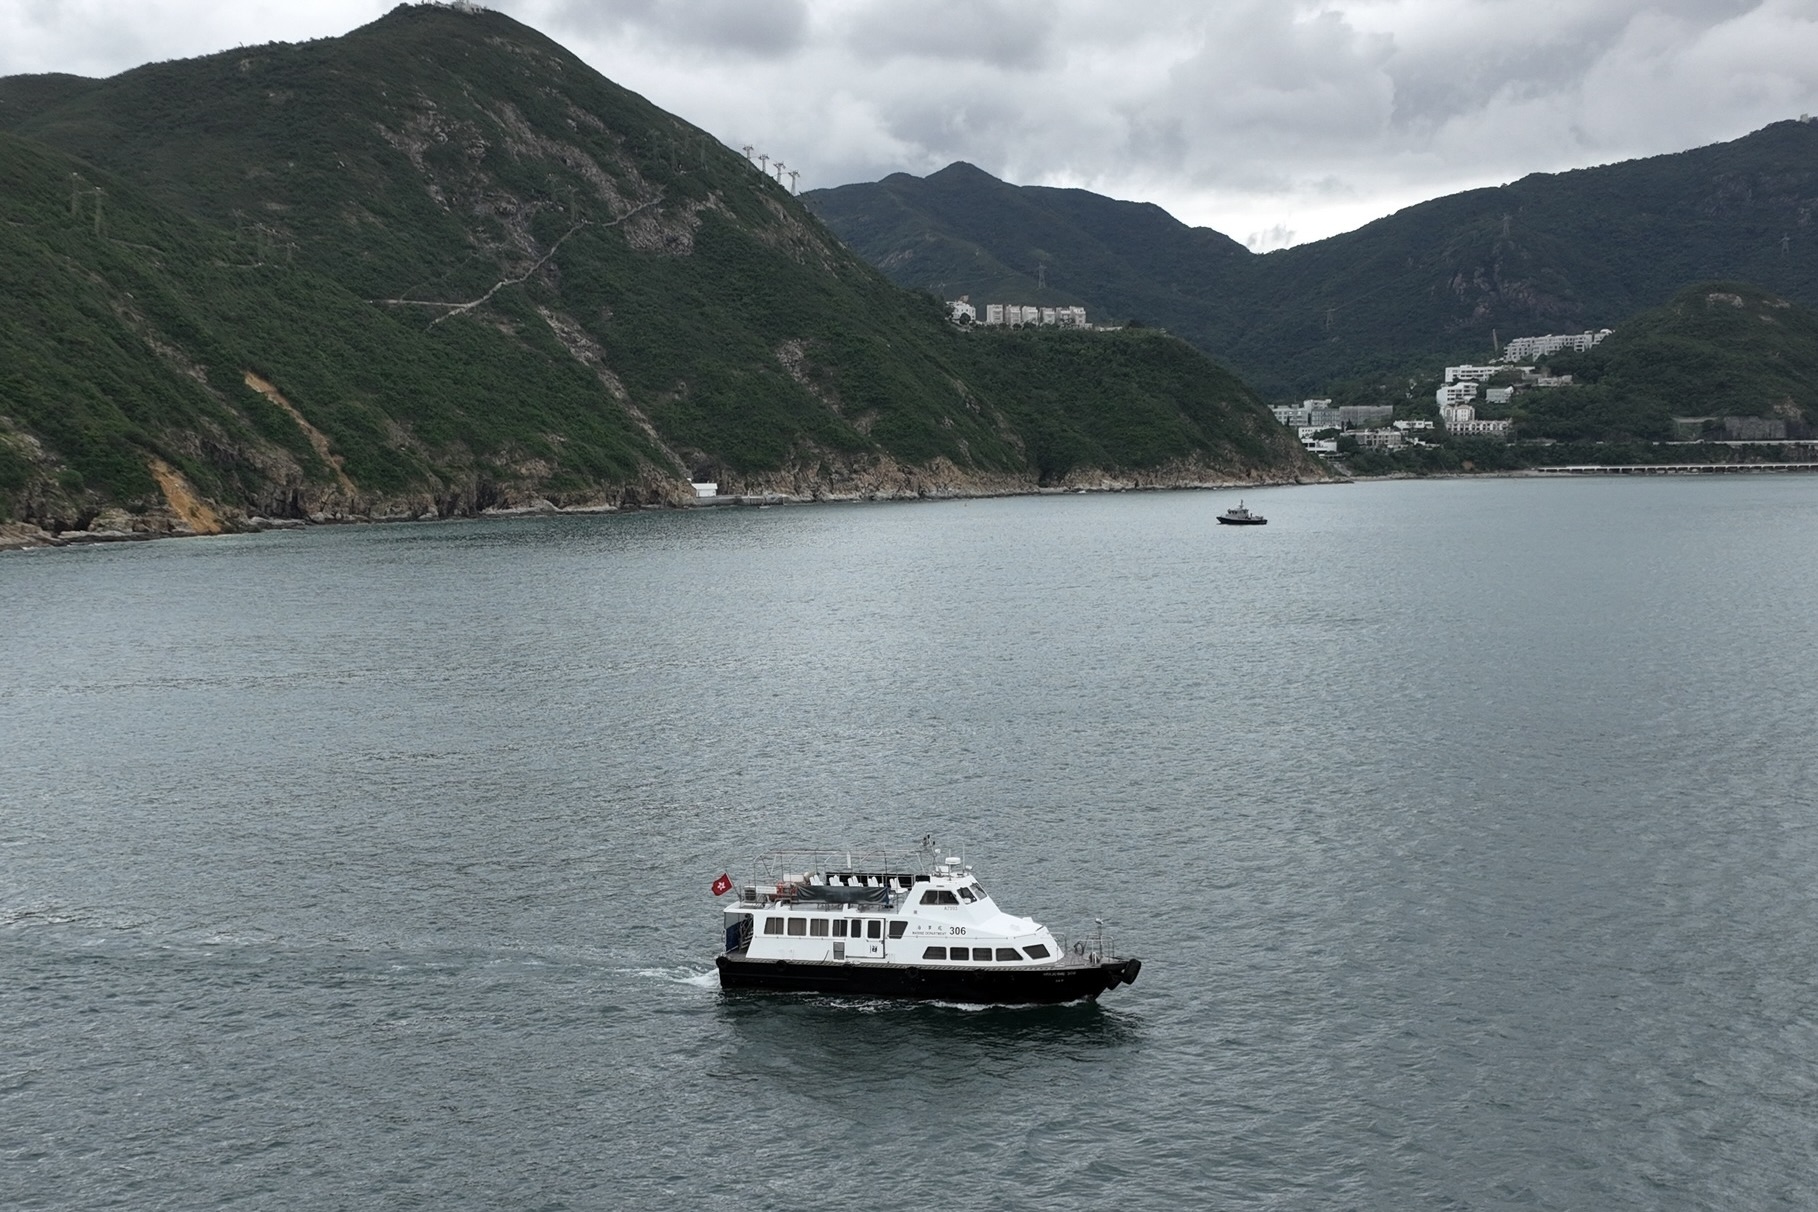 Government authorities patrolling Hong Kong waters in search of the whale spotted in the territory earlier this week.